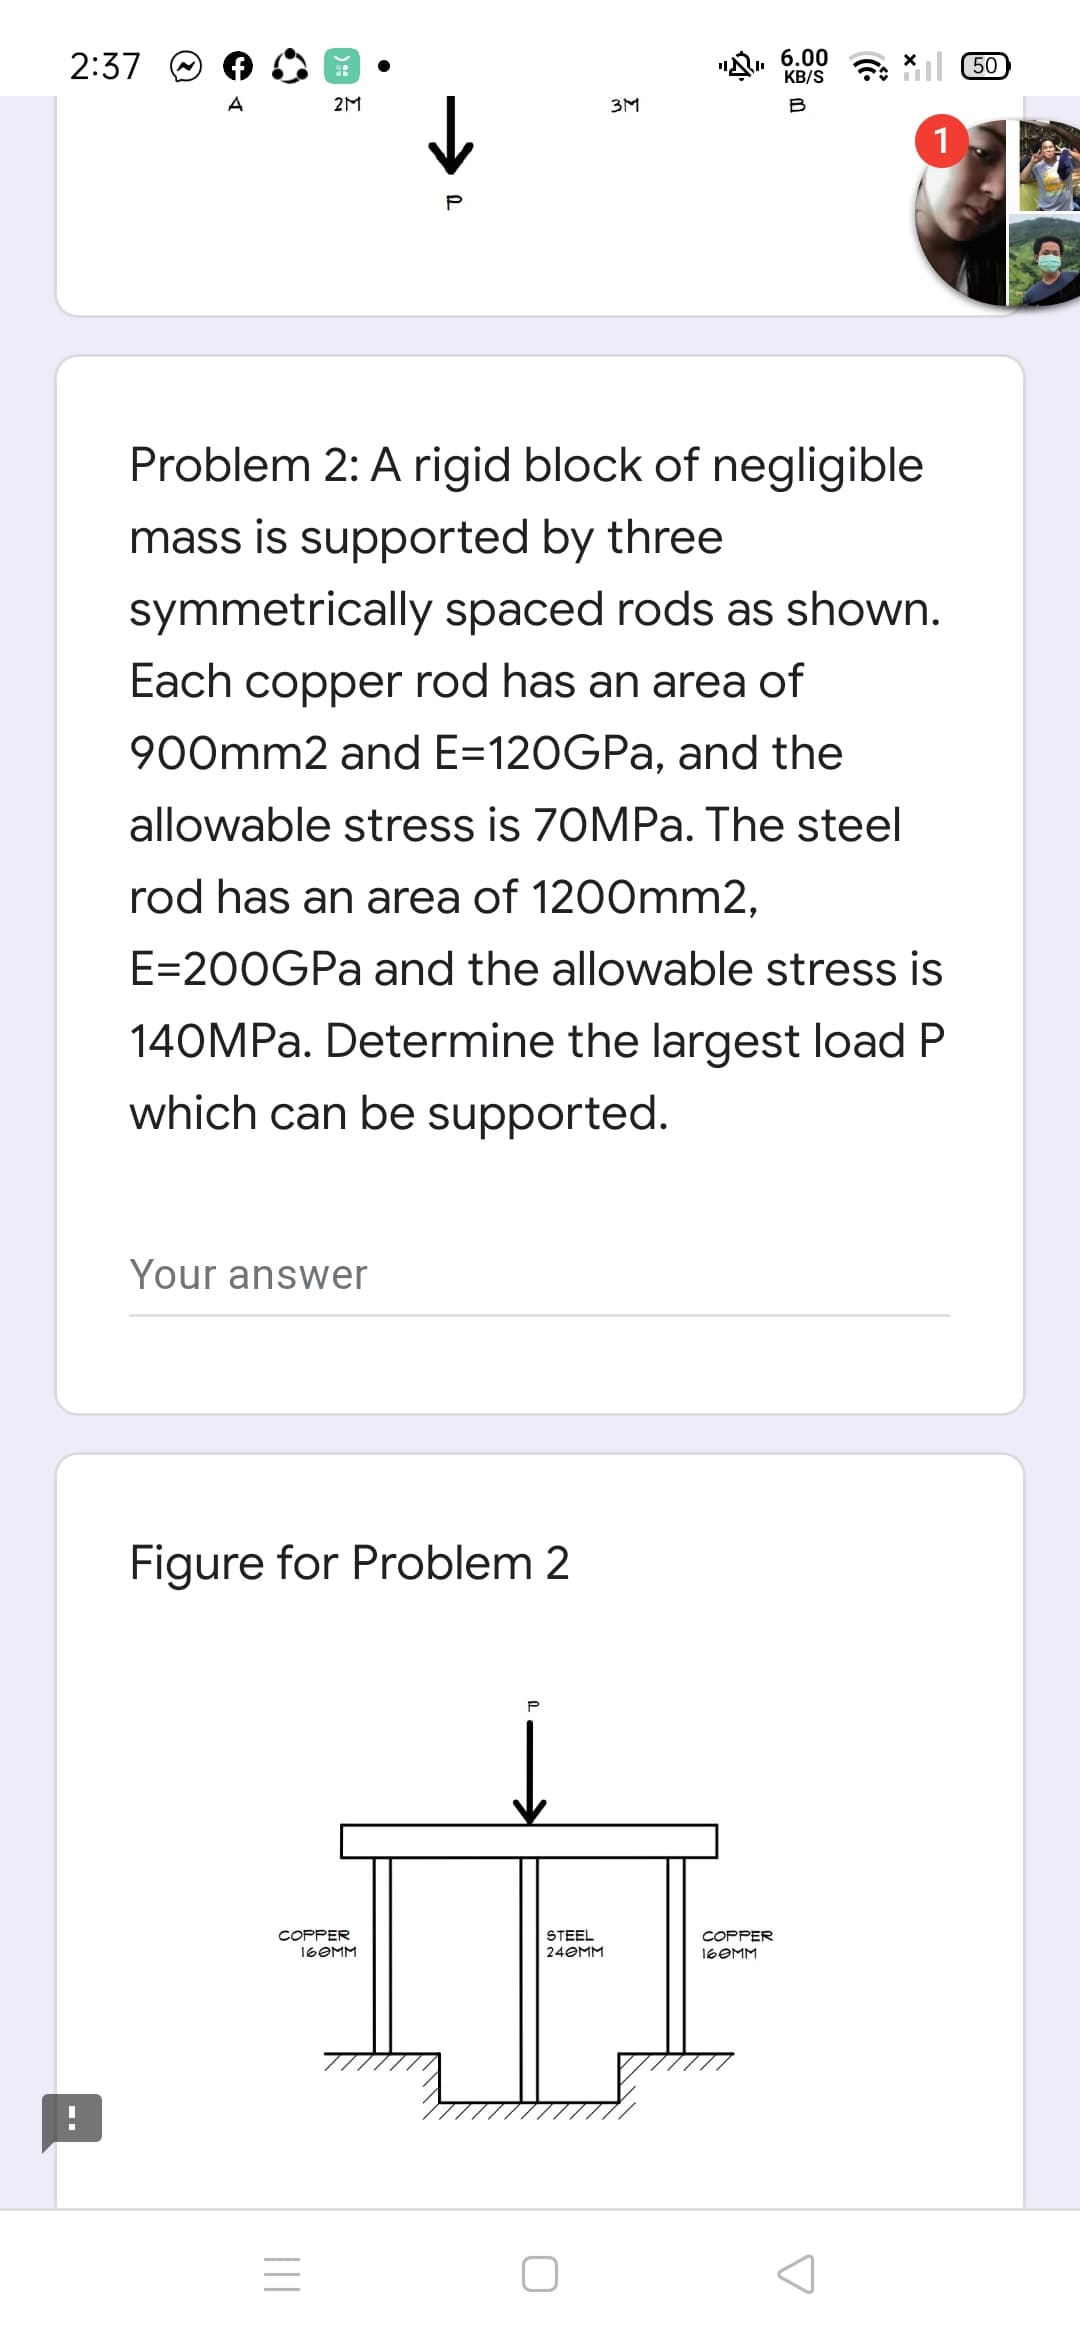 2:37
6.00
KB/S
A
2M
3M
B
Problem 2: A rigid block of negligible
mass is supported by three
symmetrically spaced rods as shown.
Each copper rod has an area of
900mm2 and E=120GPA, and the
allowable stress is 70MPa. The steel
rod has an area of 1200mm2,
E=200GPA and the allowable stress is
140MPA. Determine the largest load P
which can be supported.
Your answer
Figure for Problem 2
STEEL
24OMM
COPPER
COPPER
16OMM
16OMM
--
